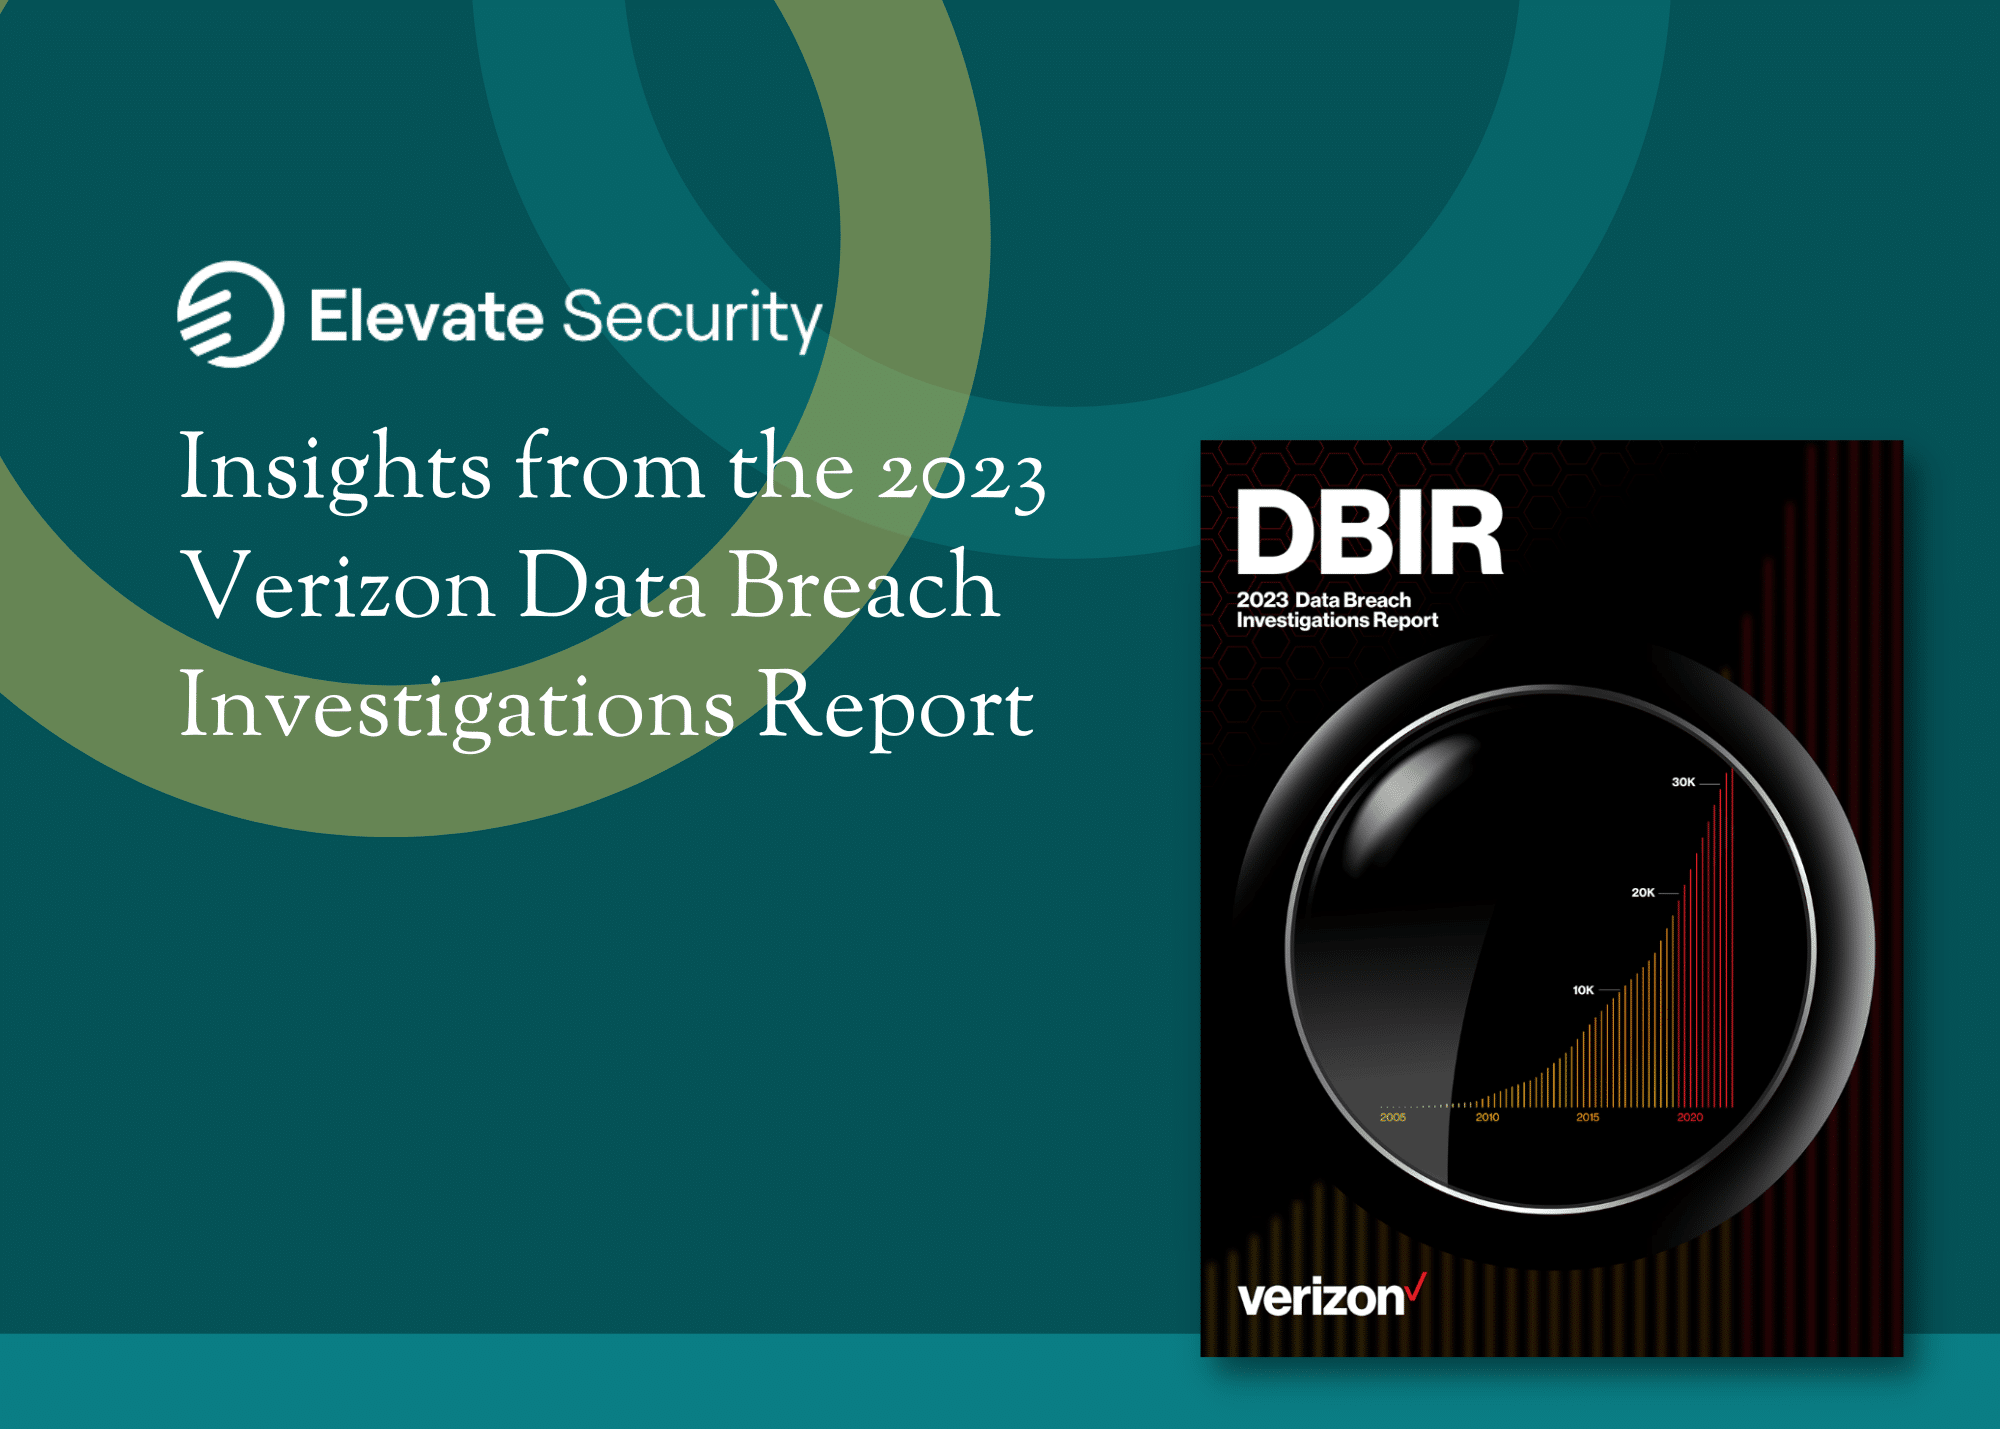 Why Human Risk Remains the Biggest Threat in Data Breaches: Insights from the 2023 Verizon DBIR